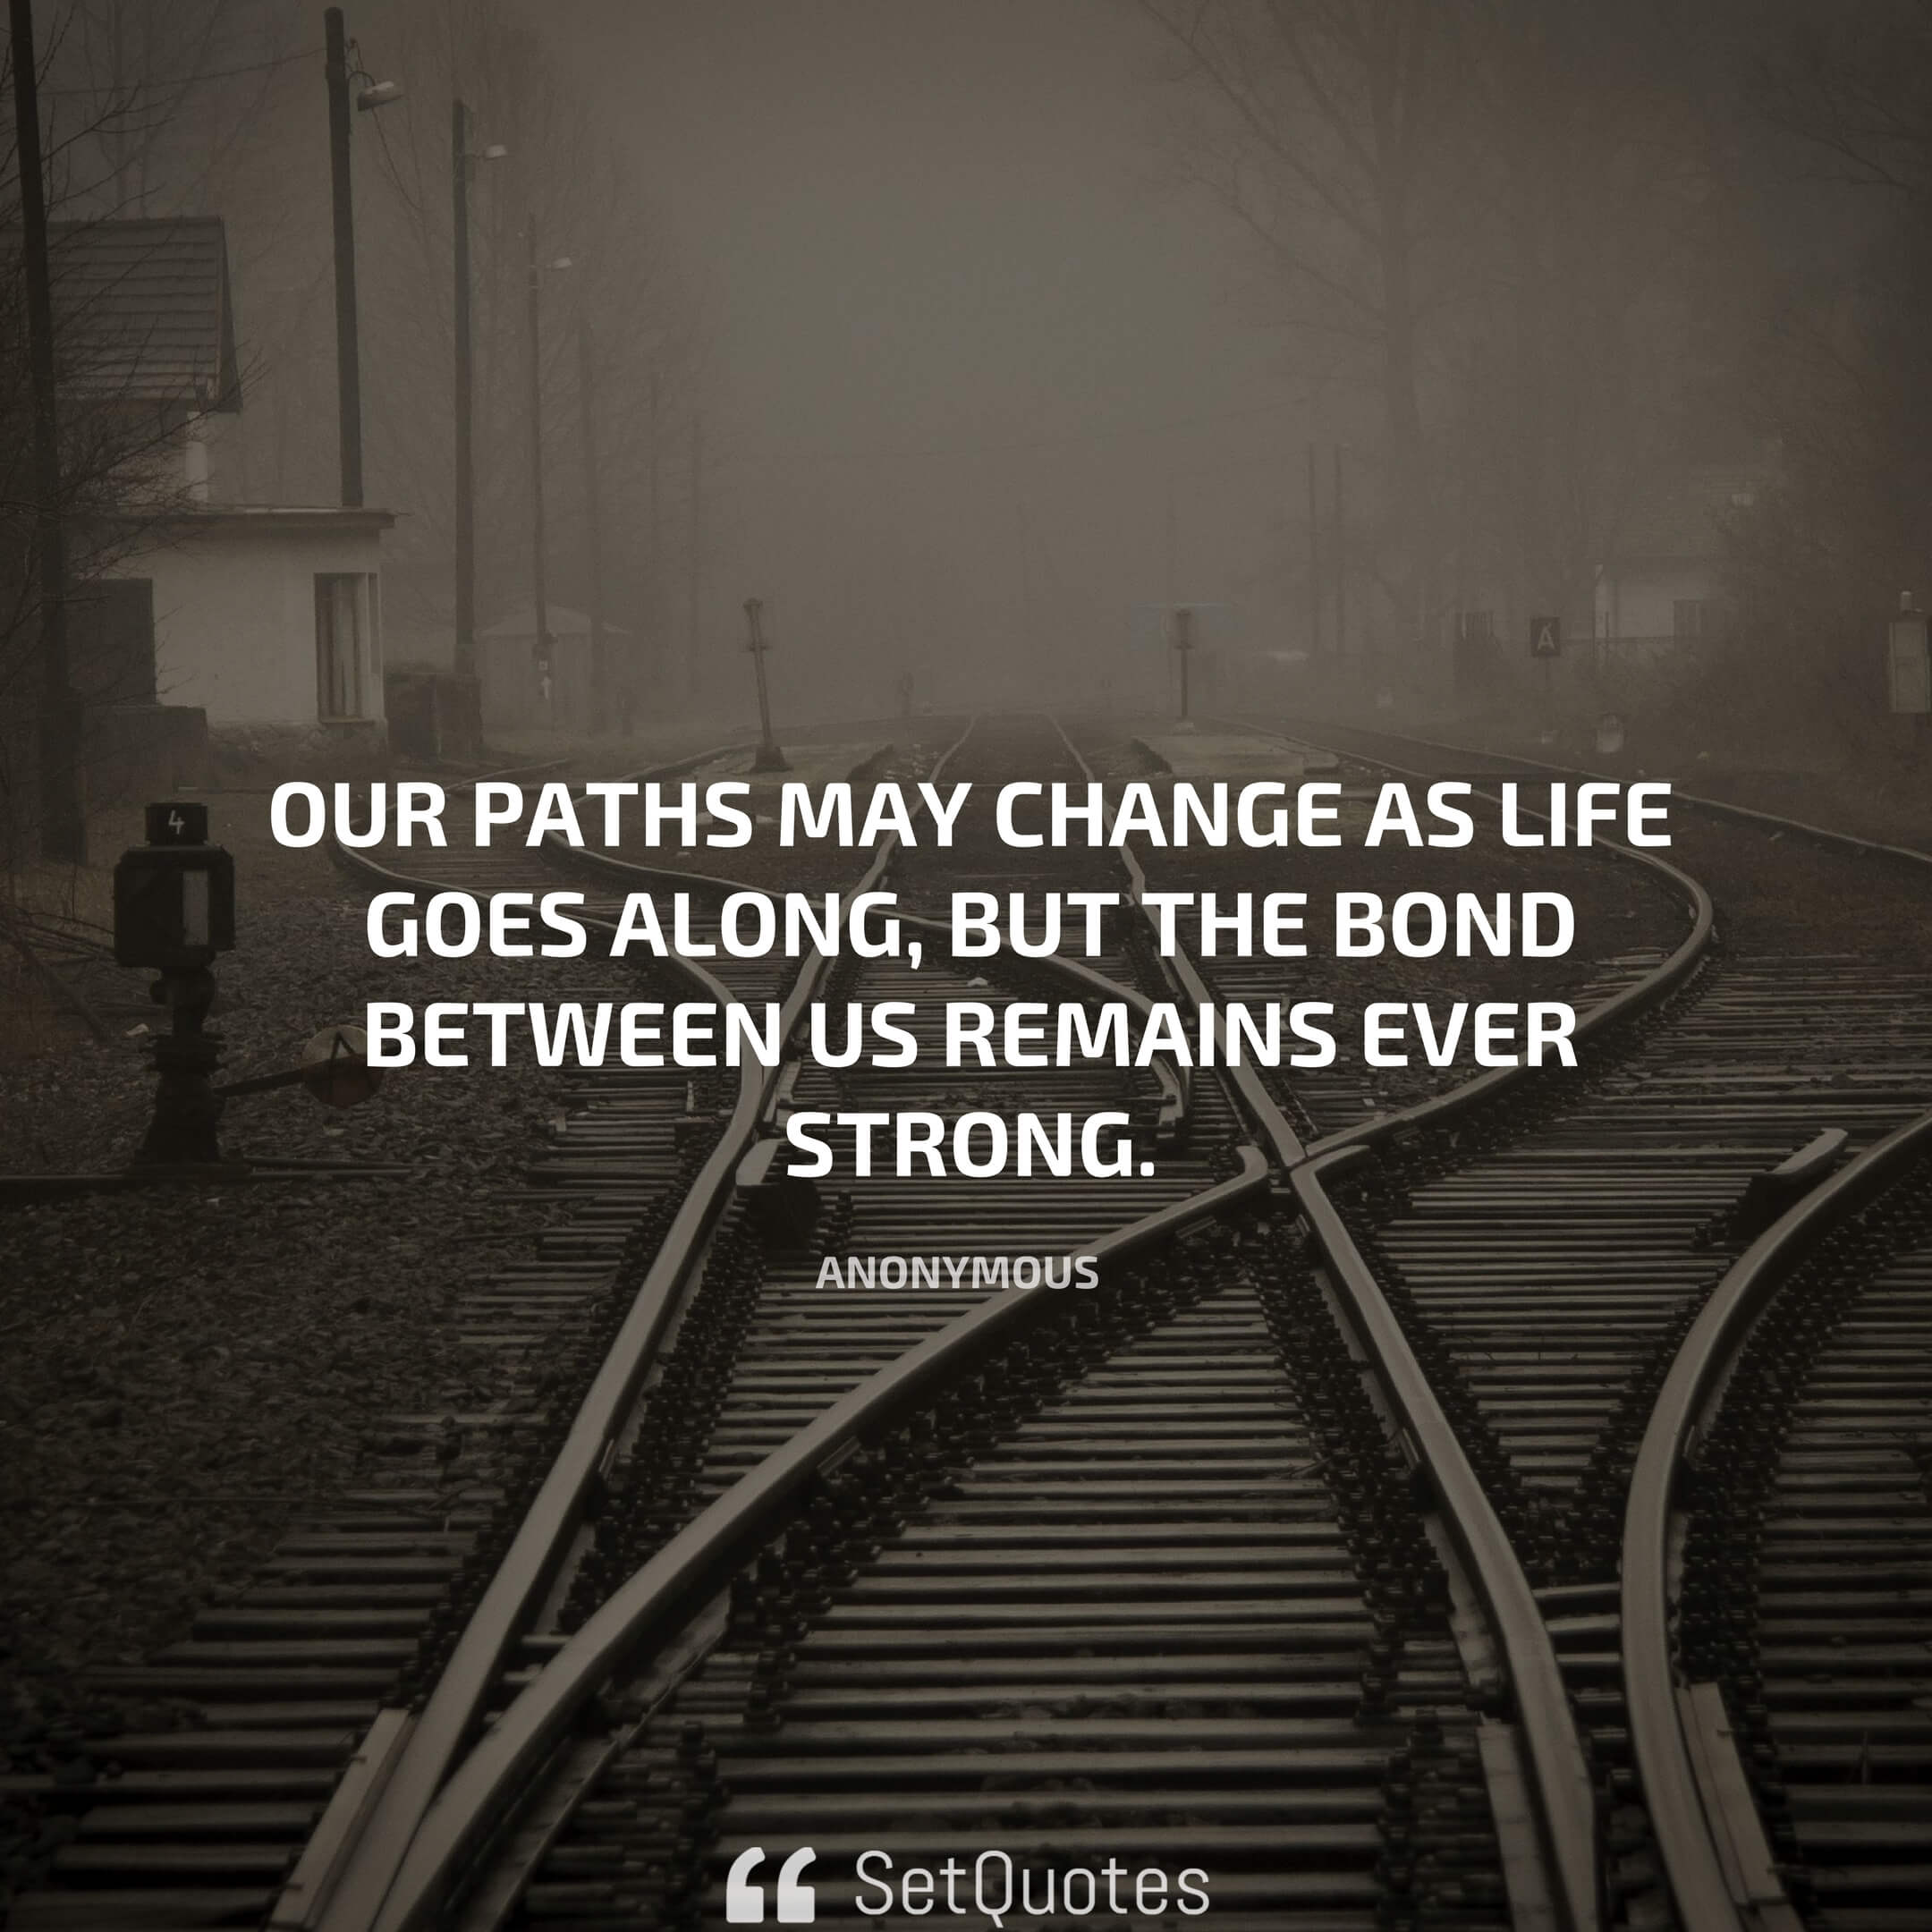 Our paths may change as life goes along, but the bond between us remains ever strong.